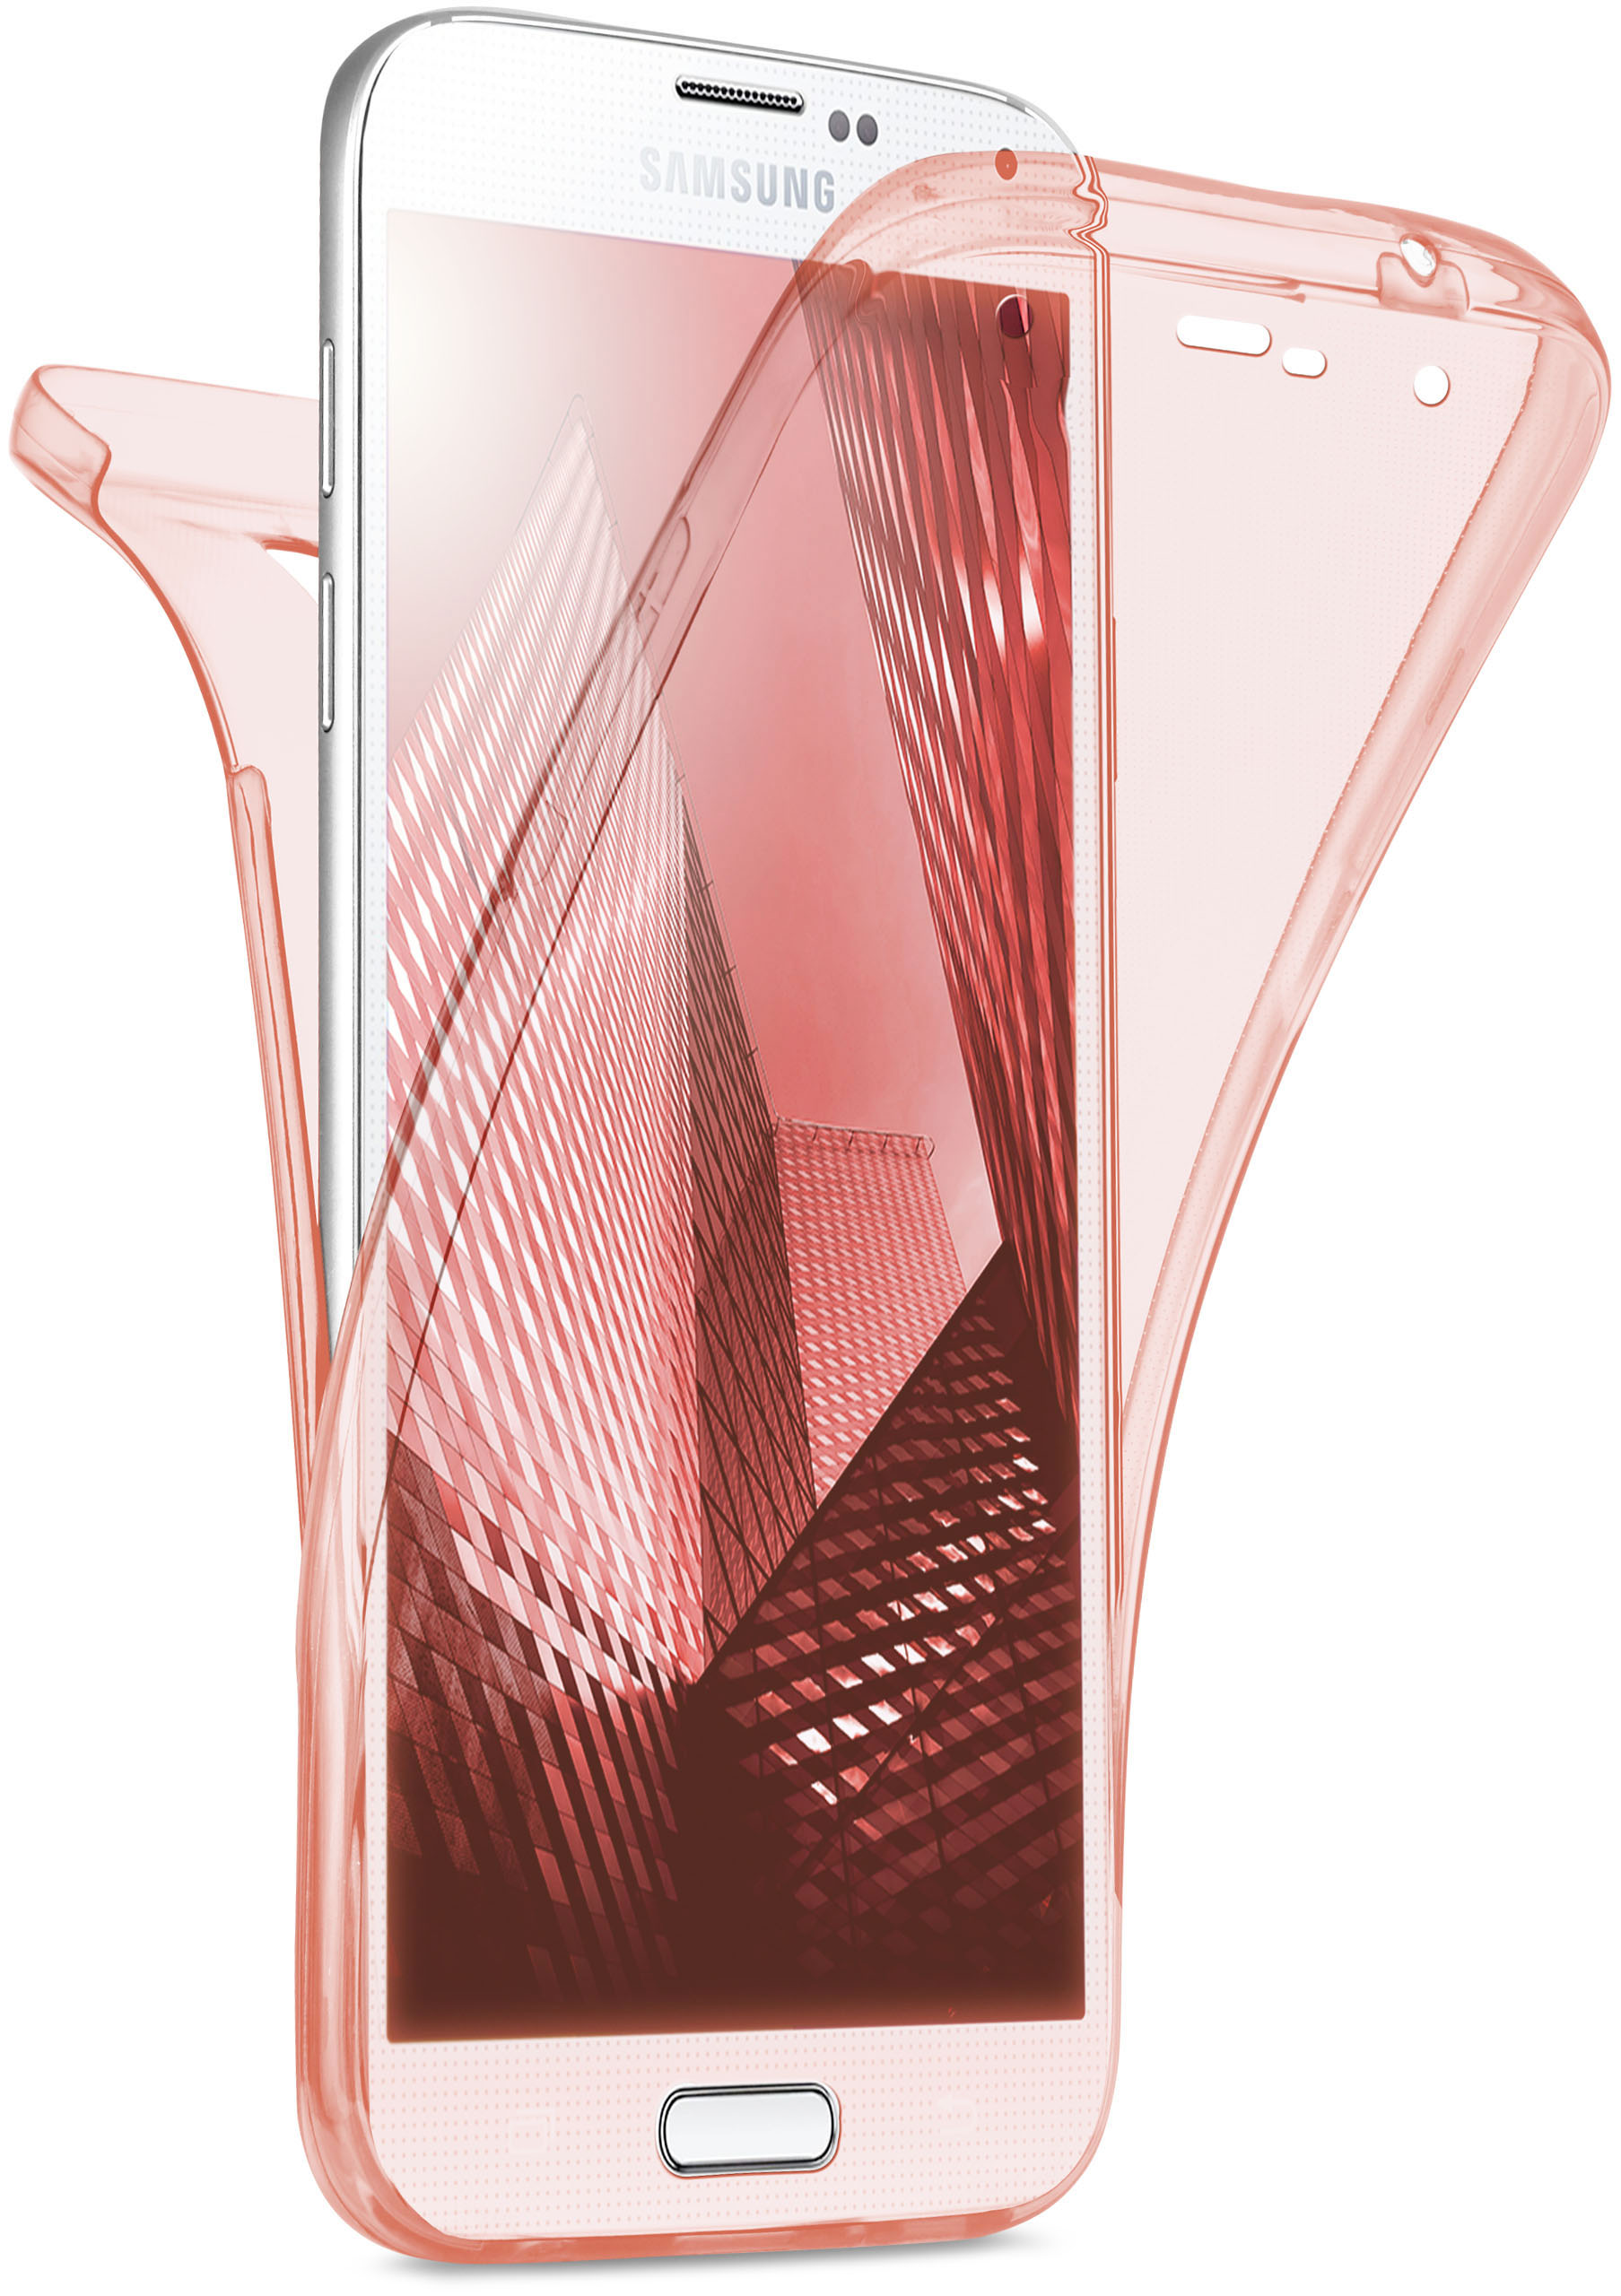 Galaxy Double / Full Cover, Samsung, S5 Neo, Case, MOEX S5 Rose